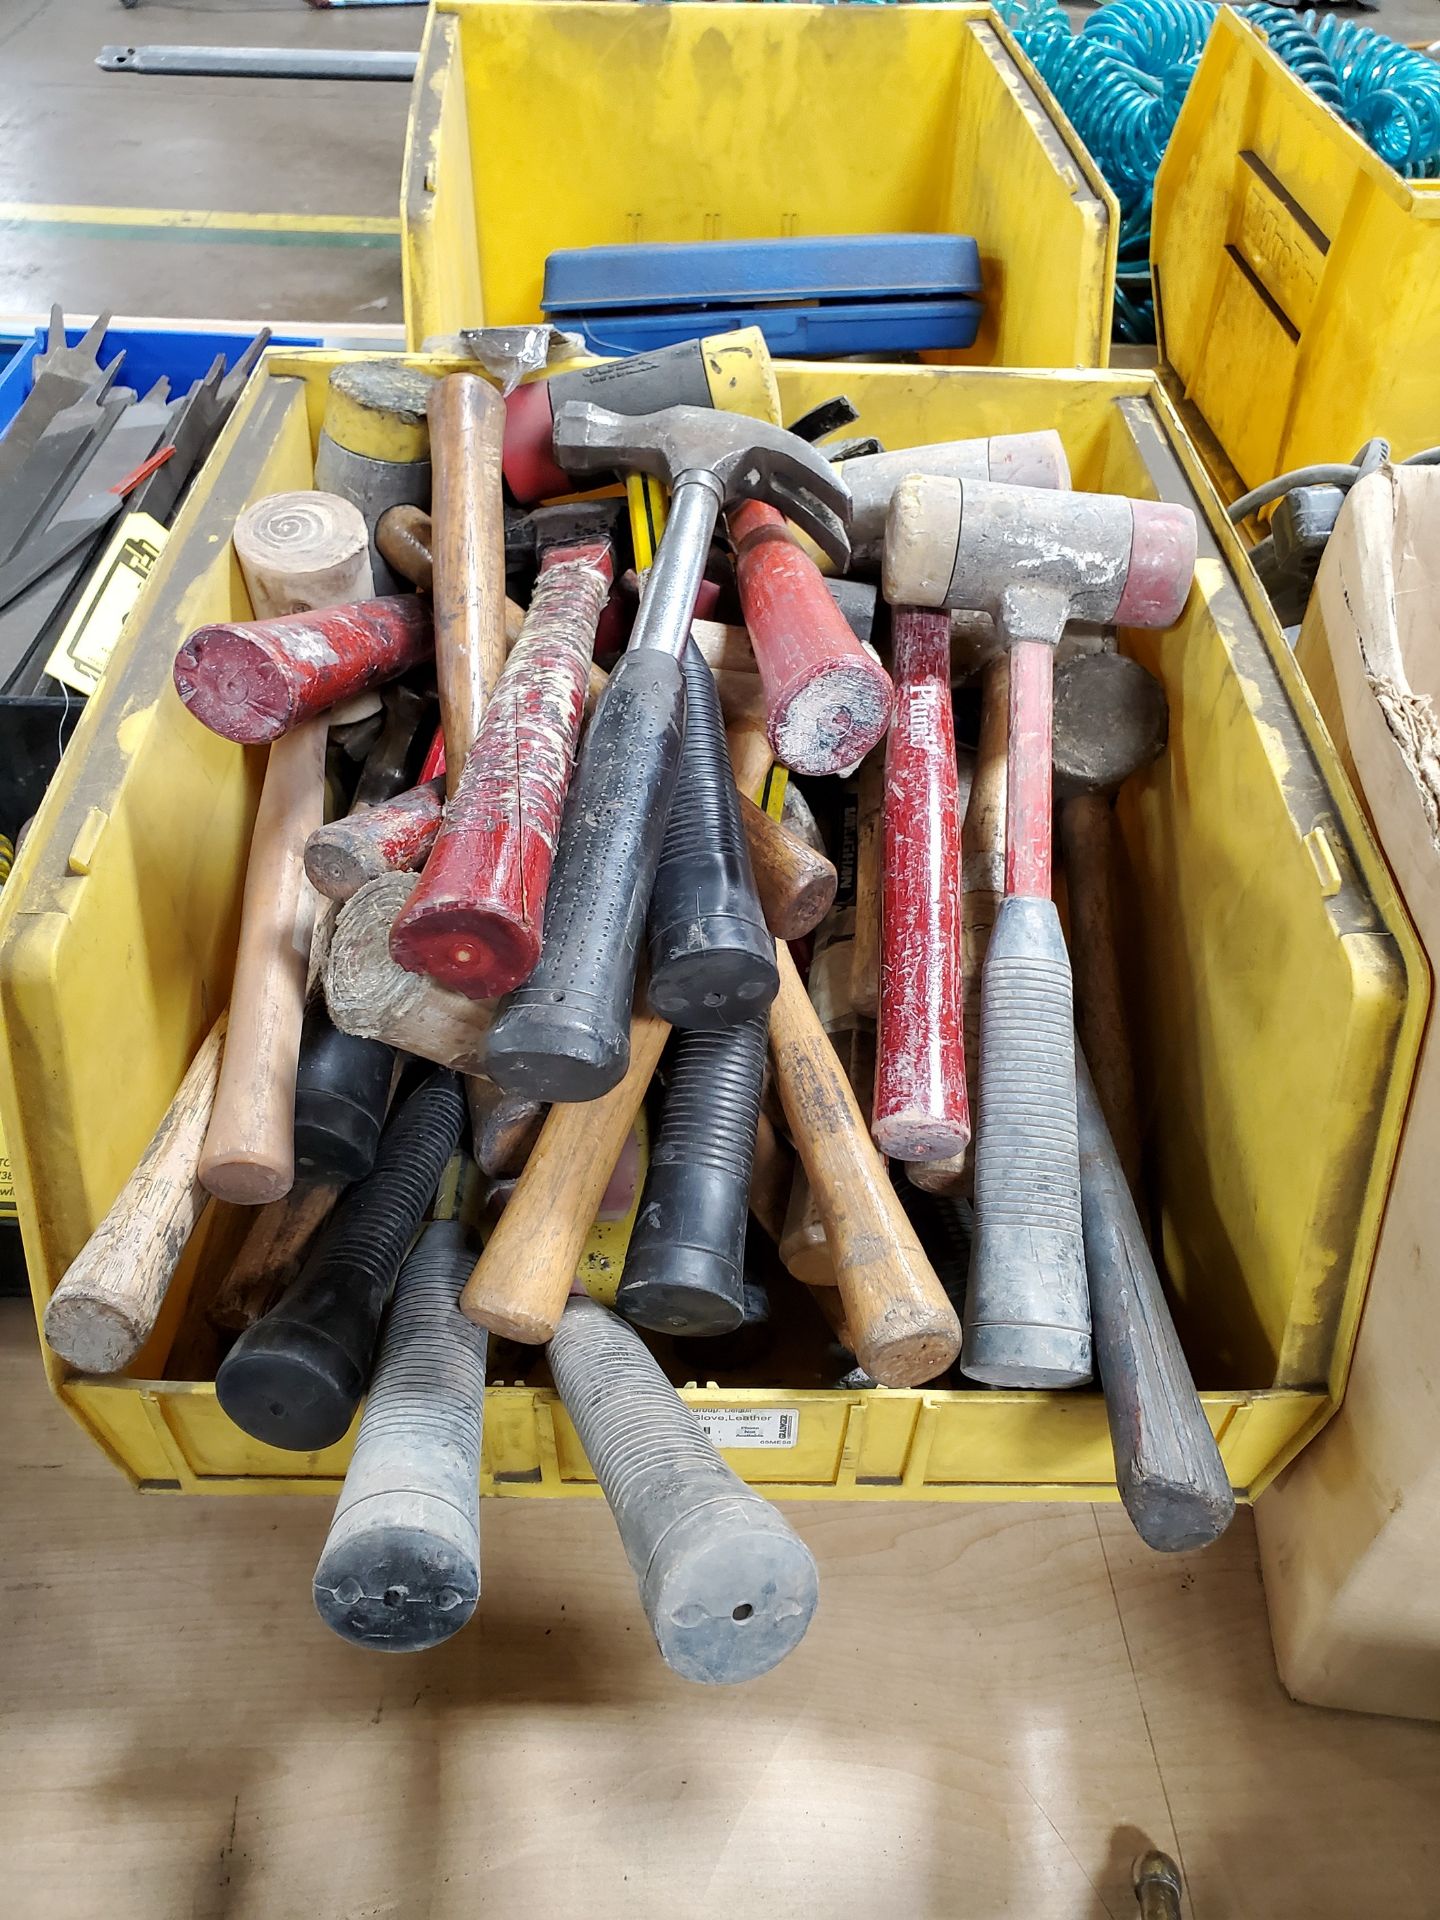 (LOT) OF ASSORTED HAMMERS & MALLETS - CLAW HAMMERS, DOUBLE AND SINGLE RUBBER/PLASTIC MALLETS